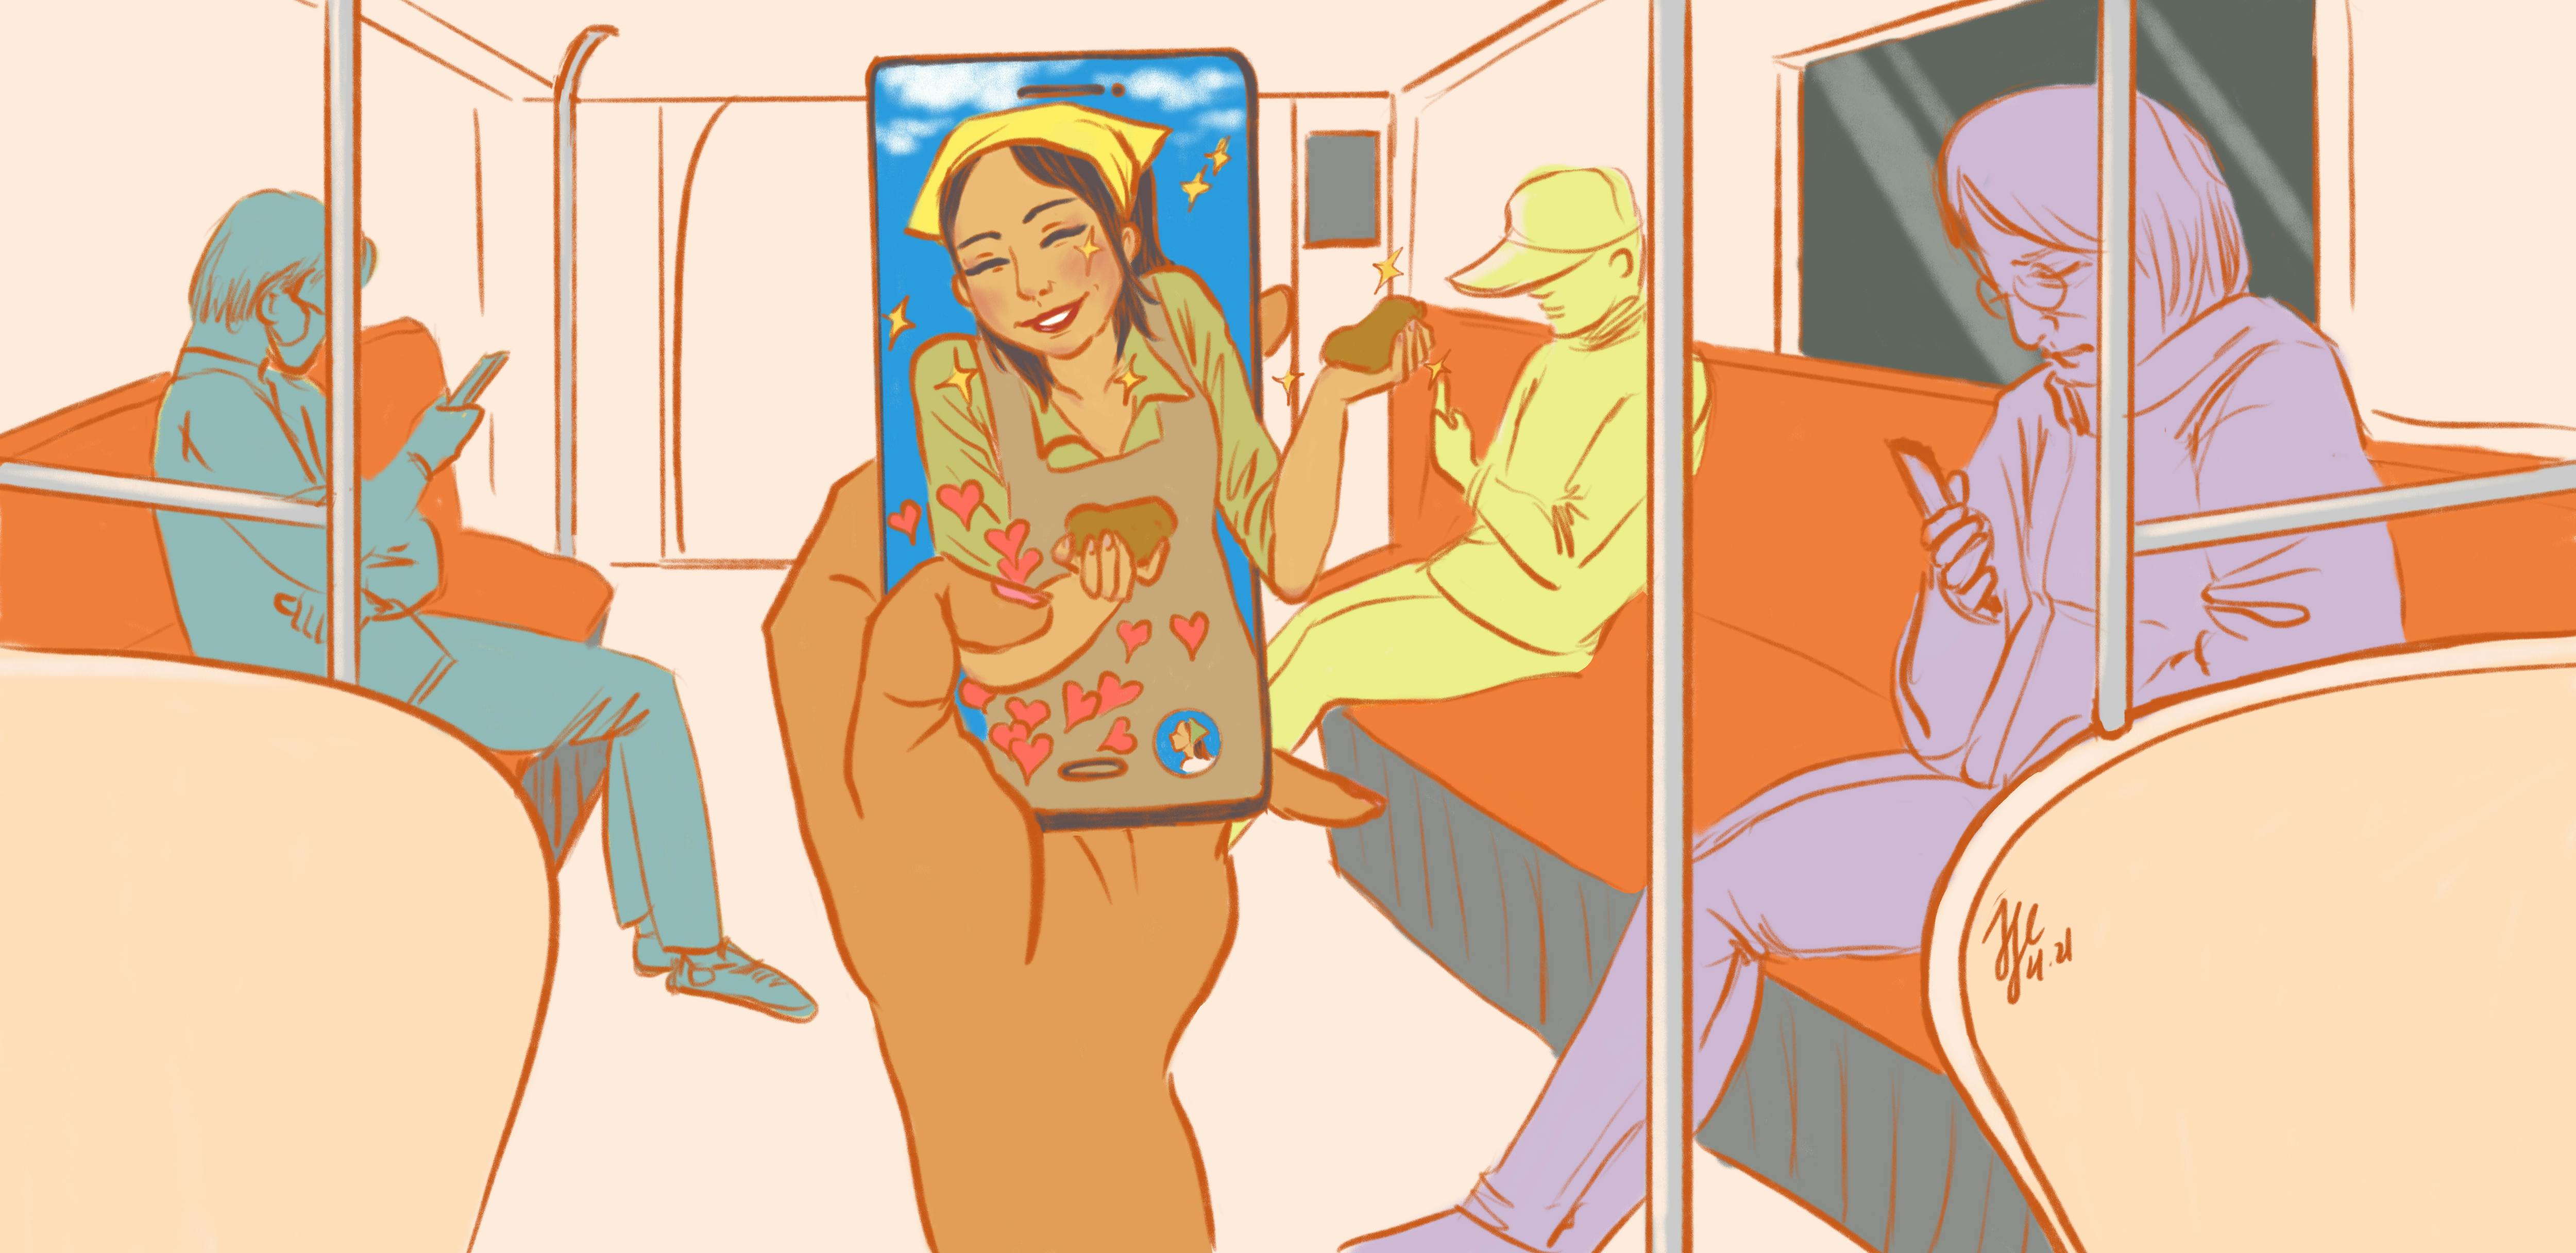 A hand holding up a phone that depicts a potato farmer selling her wares live, and receiving Likes. The disembodied person is on public transportation, where all other people are looking at their phones.